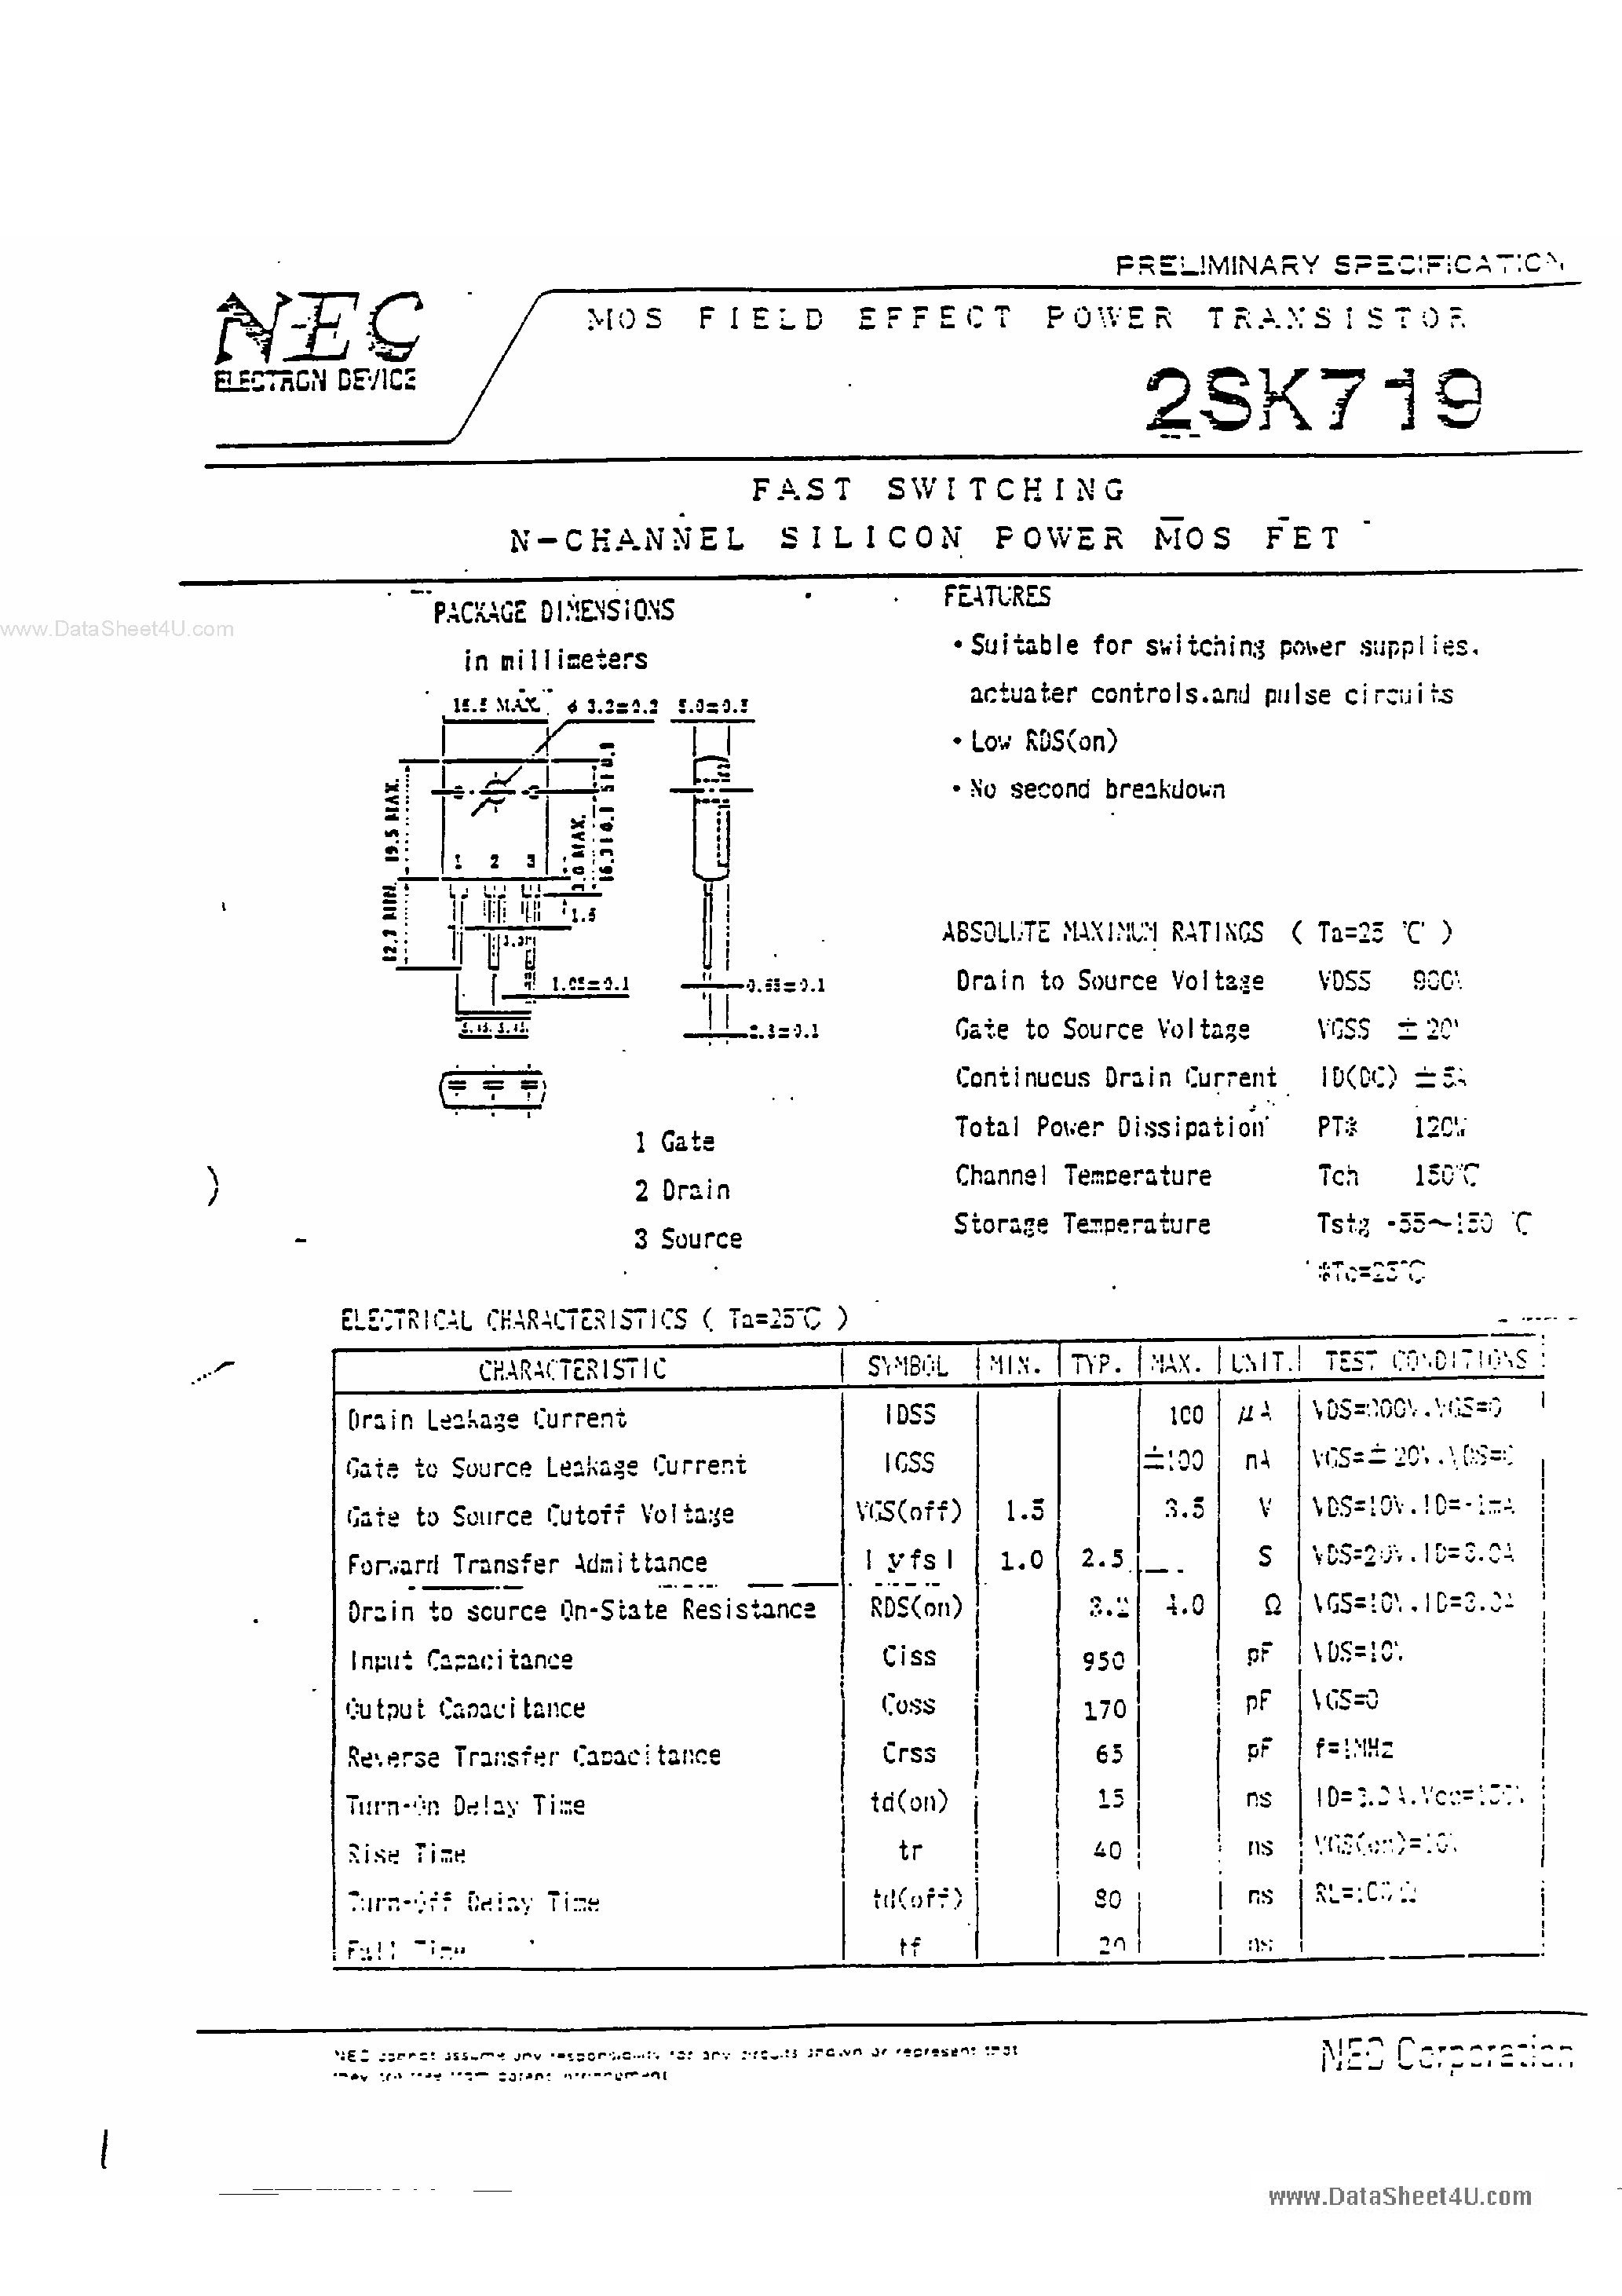 Datasheet K719 - Search -----> 2SK719 page 1